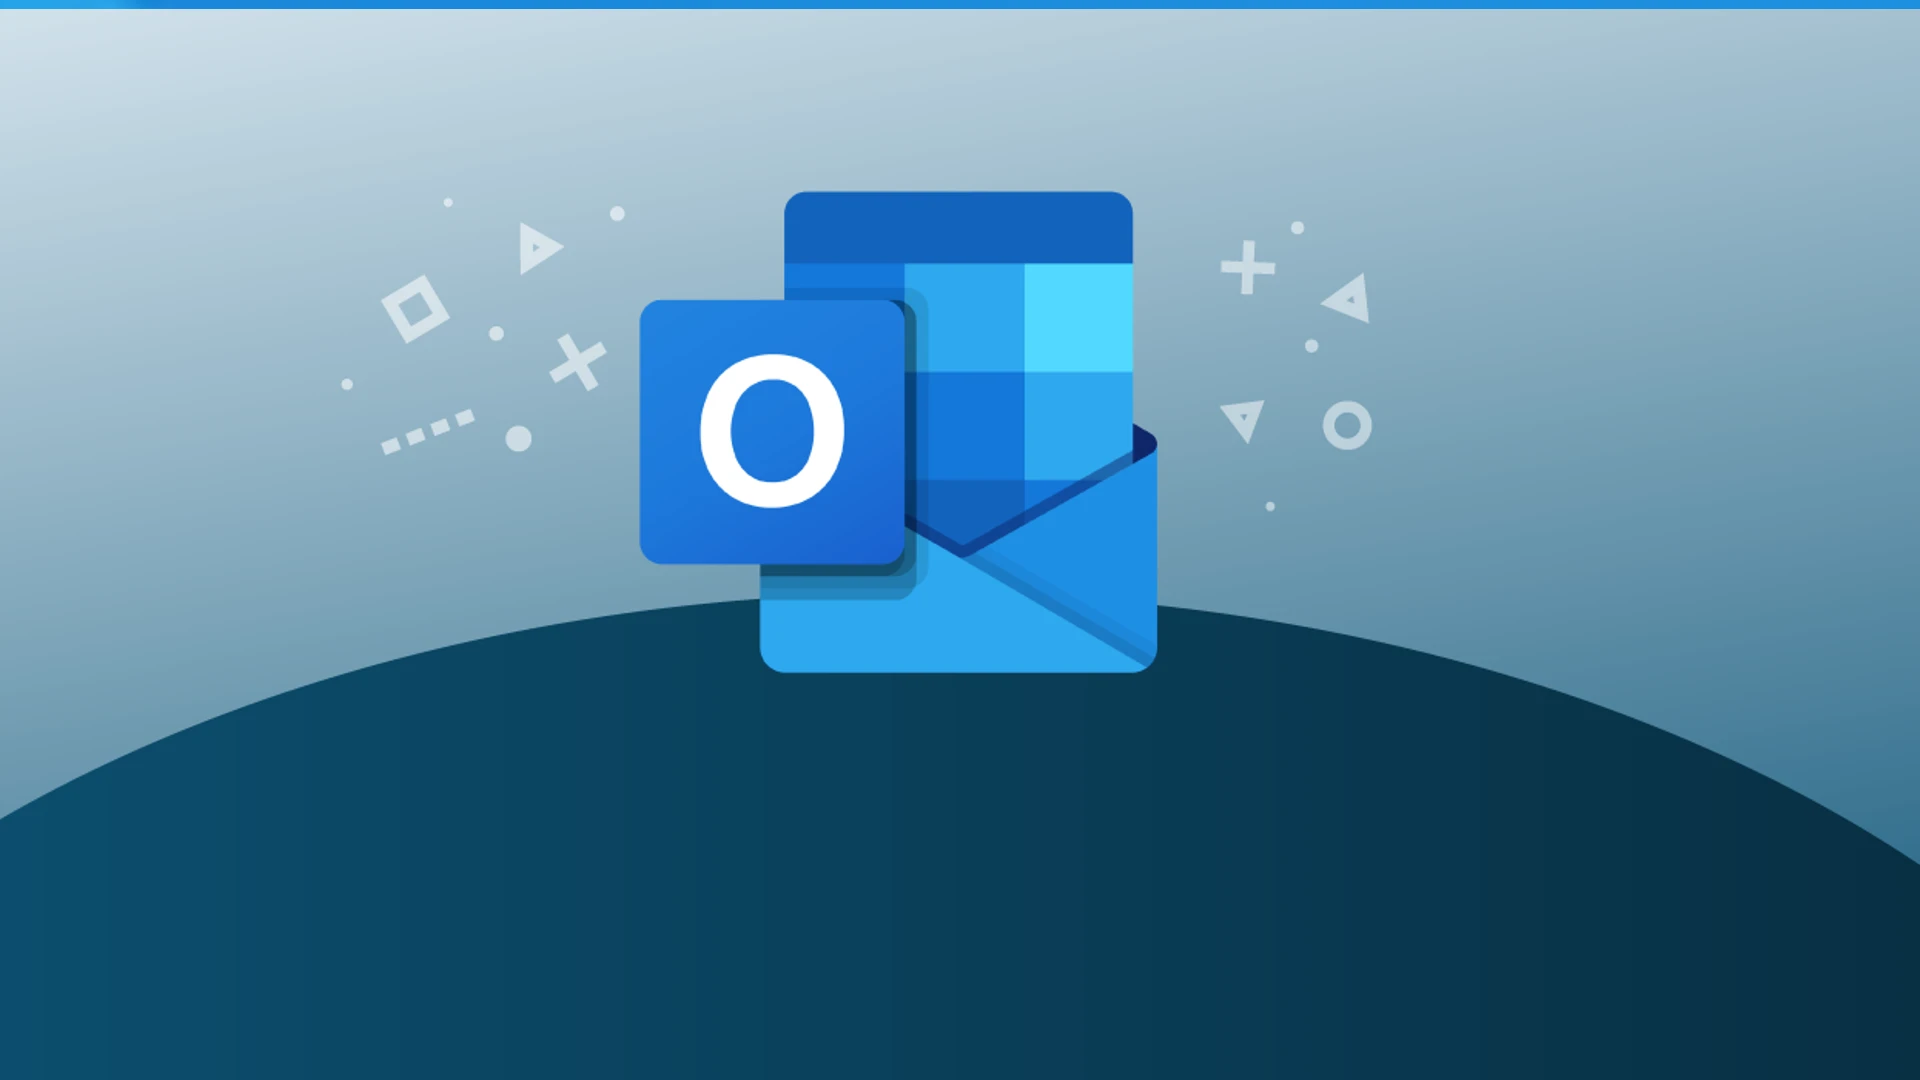 How to mark Email as Norvmal, Personal, Private or Confidential in Outlook